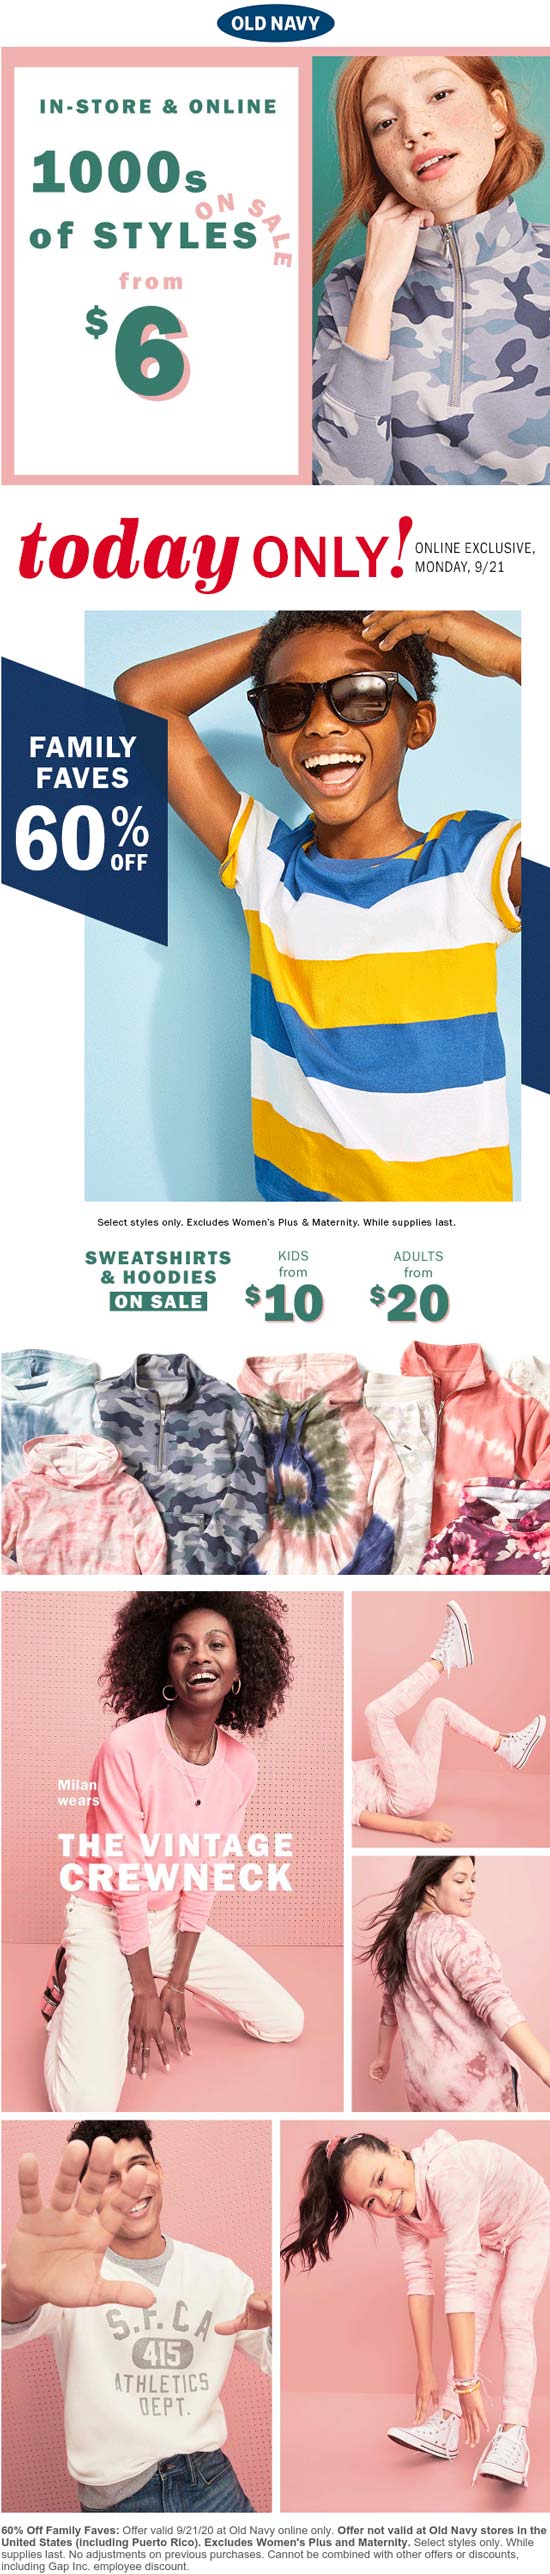 Old Navy stores Coupon  60% off family faves today online at Old Navy #oldnavy 